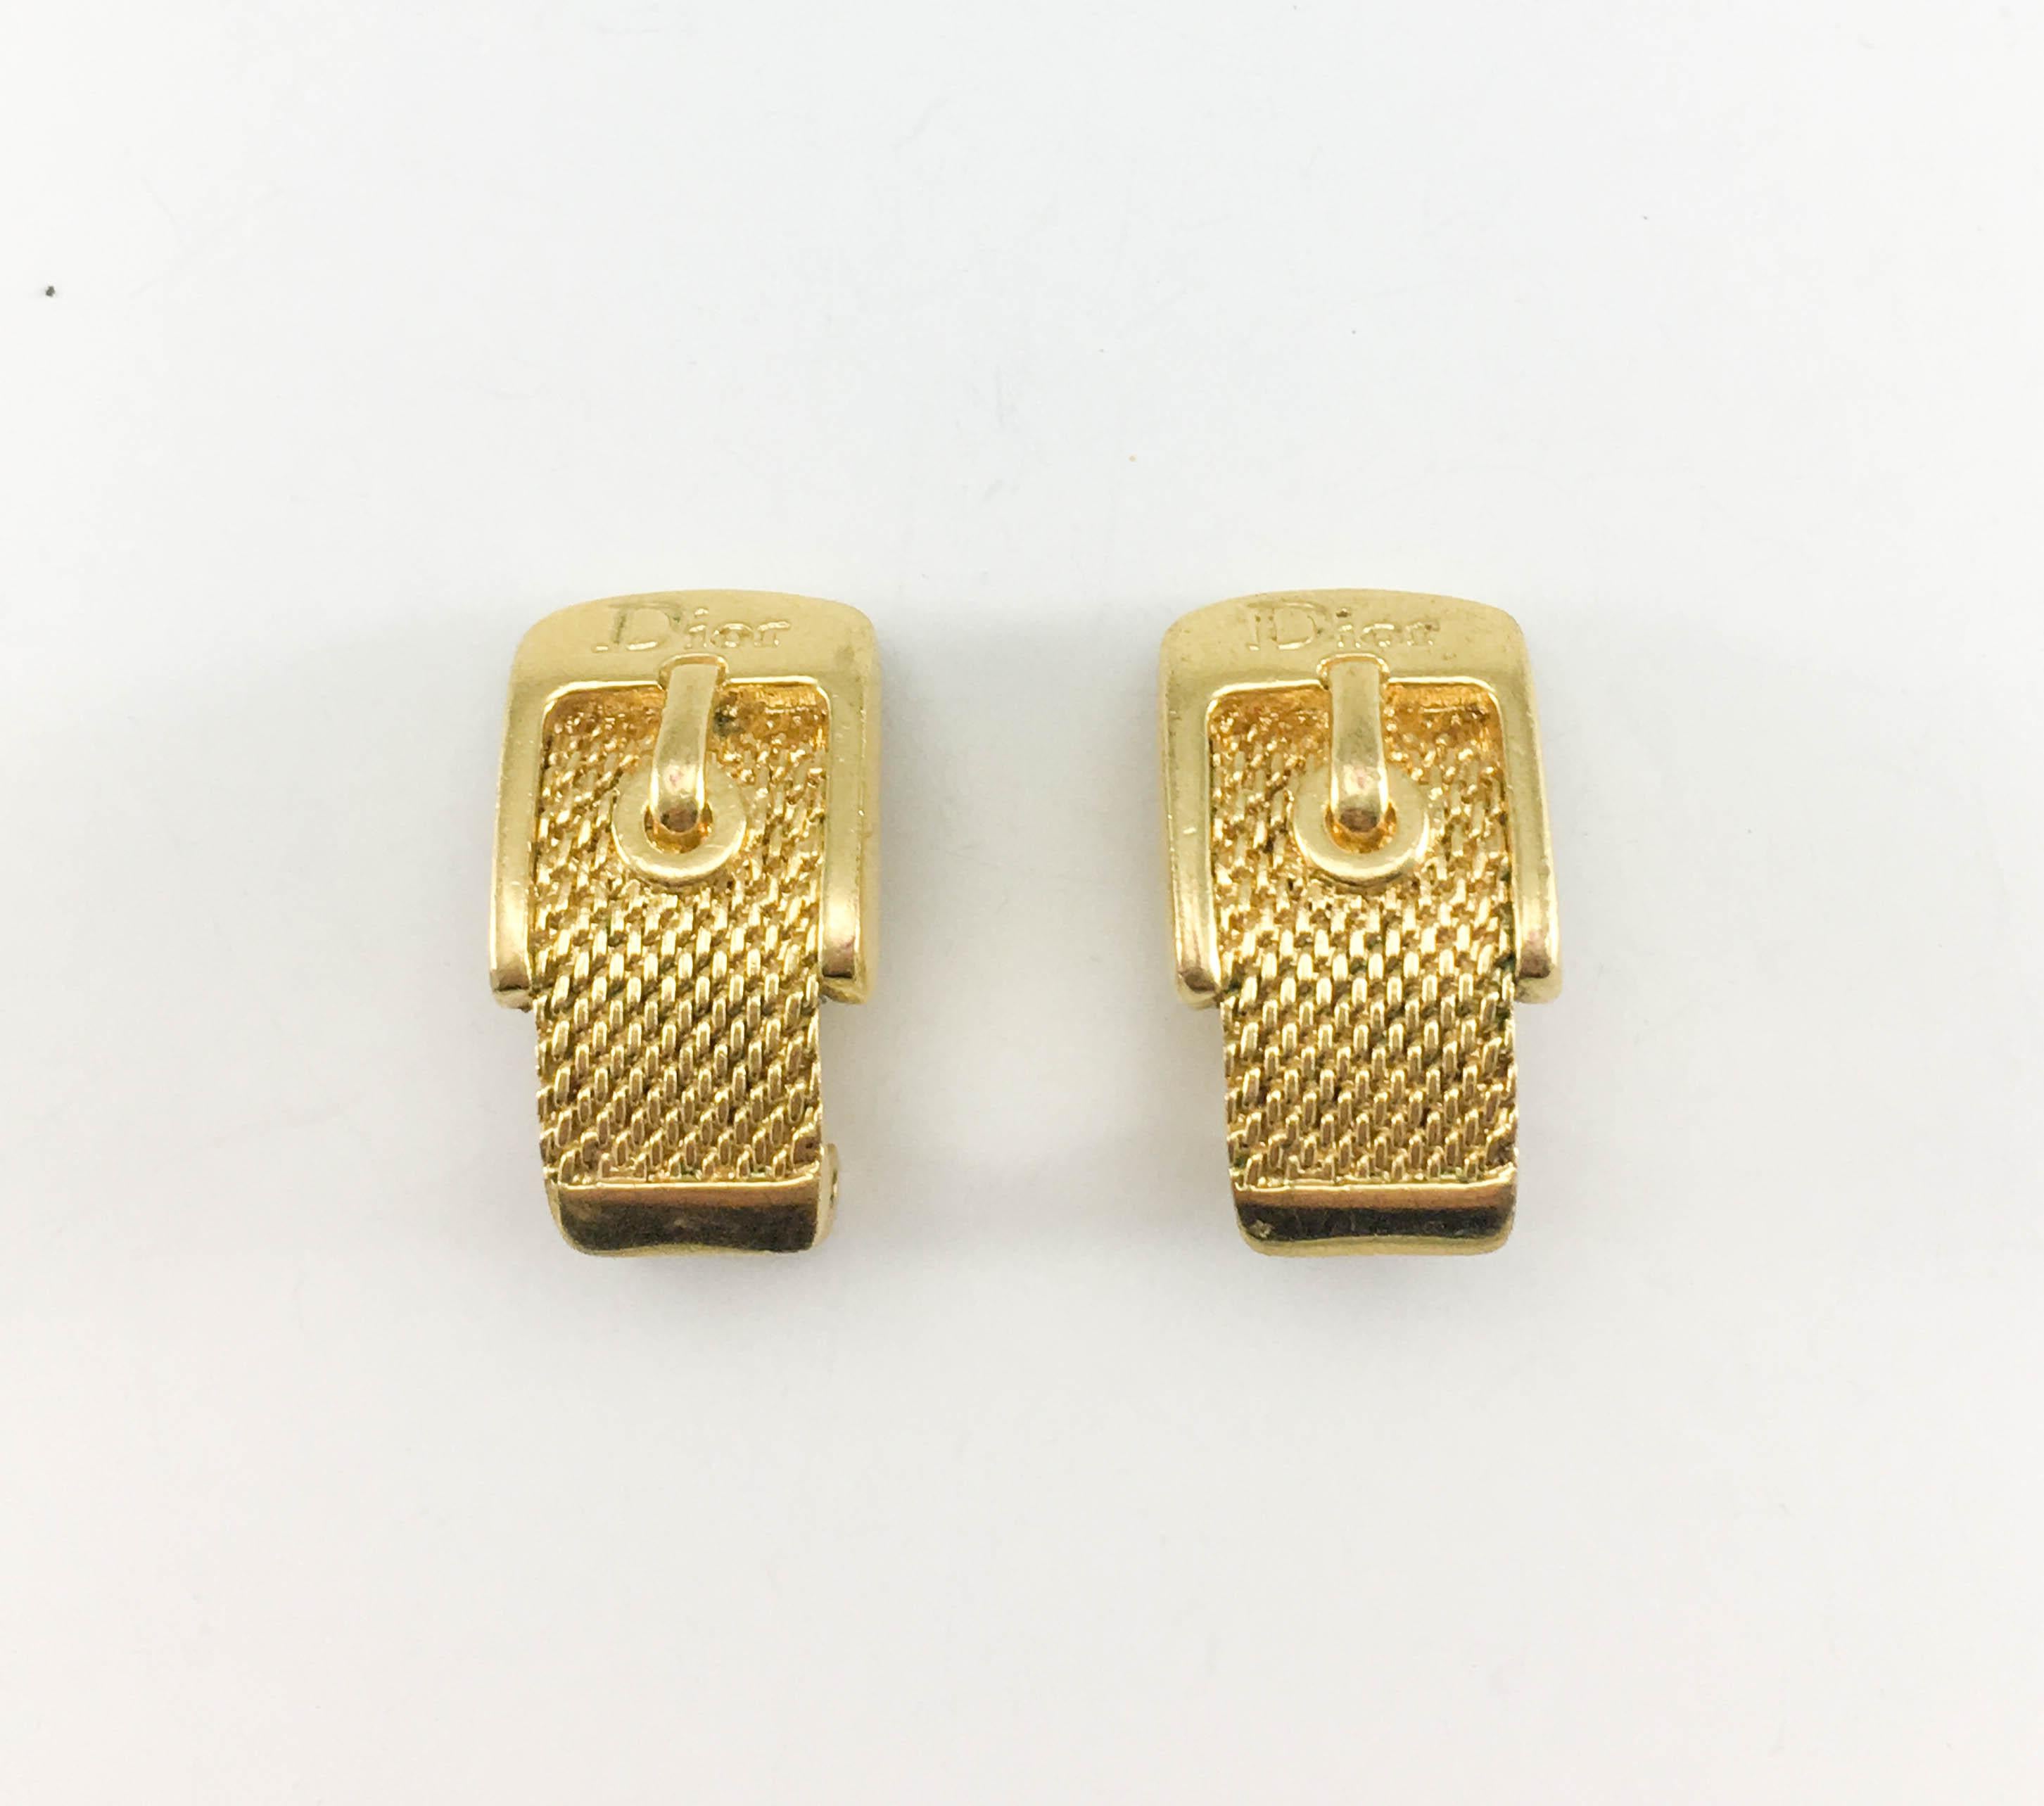 Dior Gold-Plated Buckle Earrings In Excellent Condition For Sale In London, Chelsea